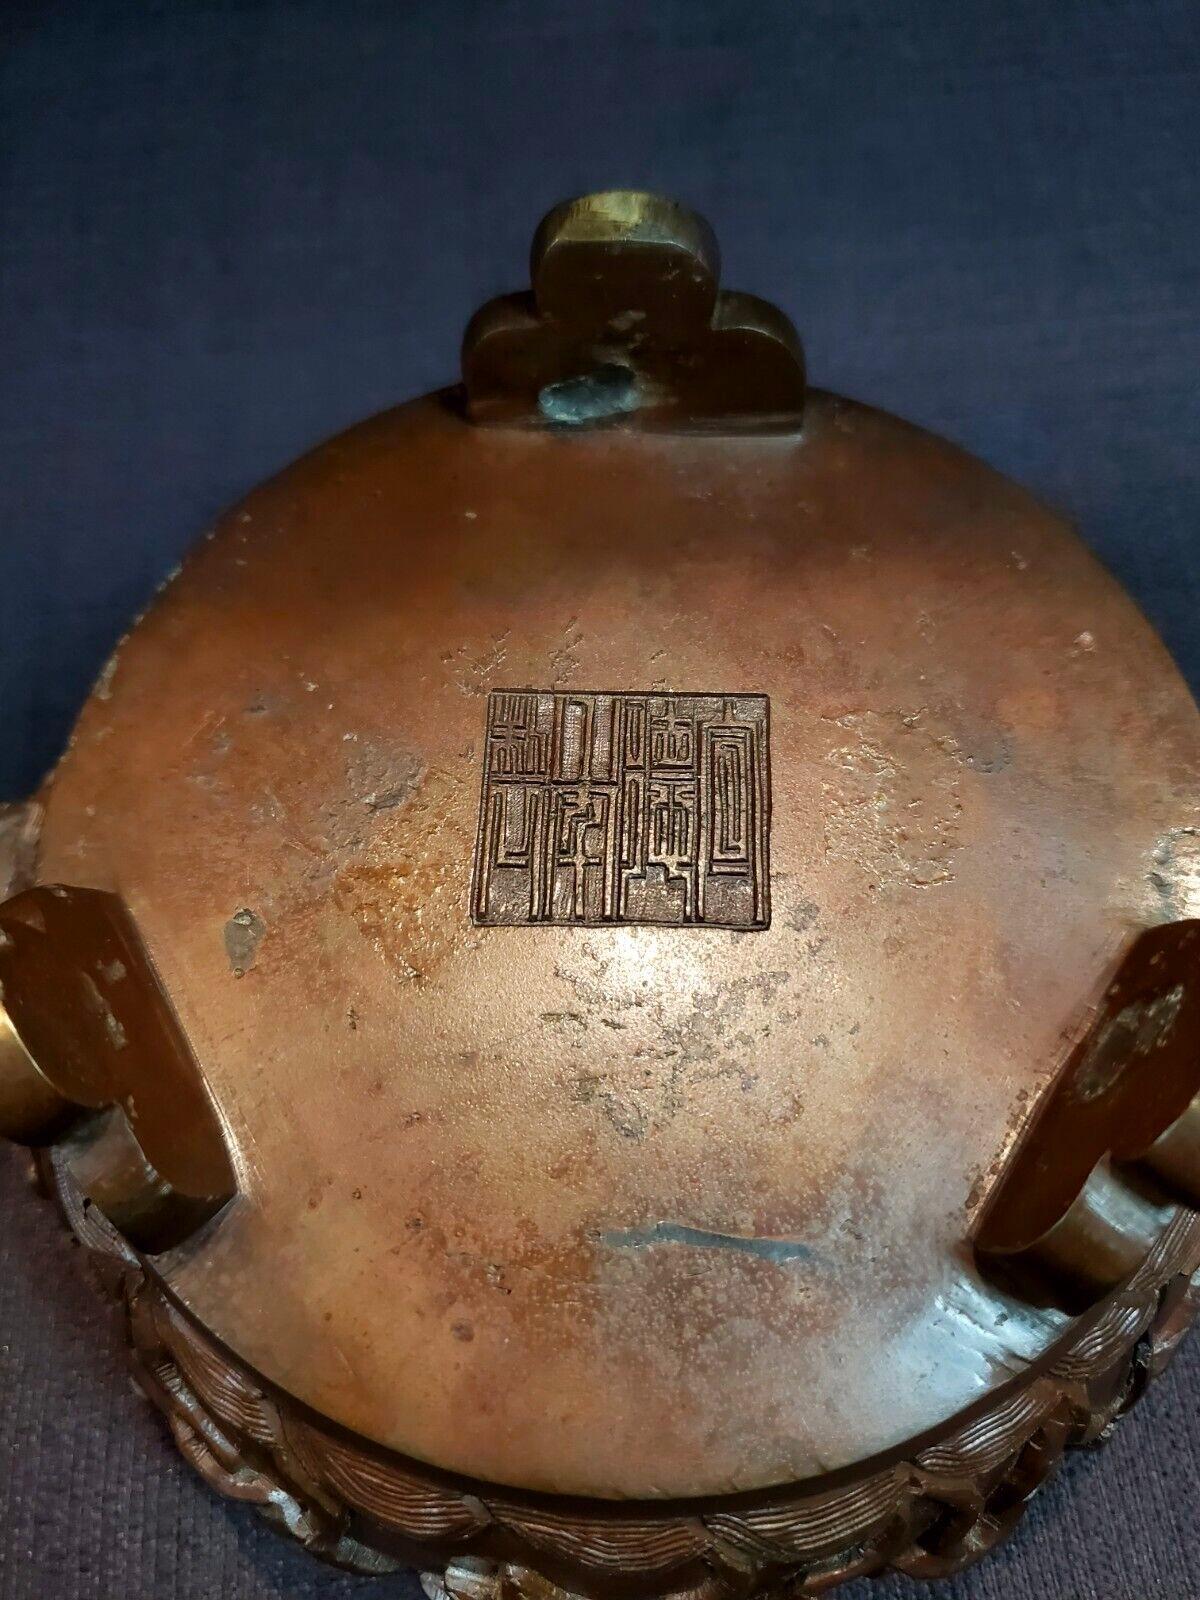 Qing, Chinese antique early period high relief lotus leaf pattern copper incense burner/ ?,?? ?????????.
Condition:Shows normal sign of wear and use, No damage or cracks. 
Approximate size: Height: 8cm, Diameter: 12.5cm. Please refer the size and